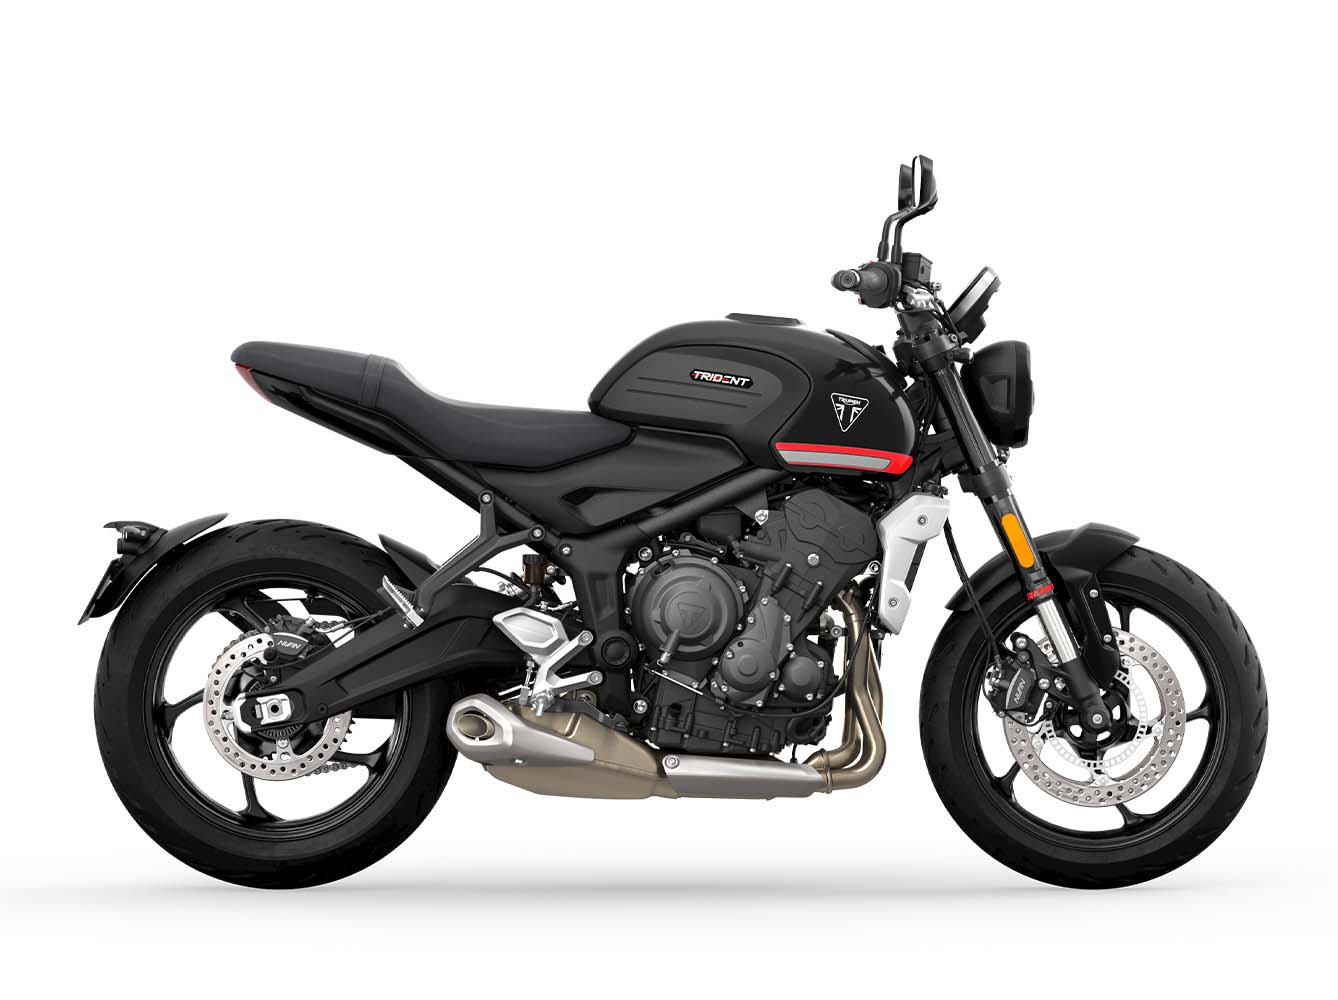 Triumph Tiger Sport 660 and Trident 660, now available with 4.9% APR Representative finance - T&Cs apply.